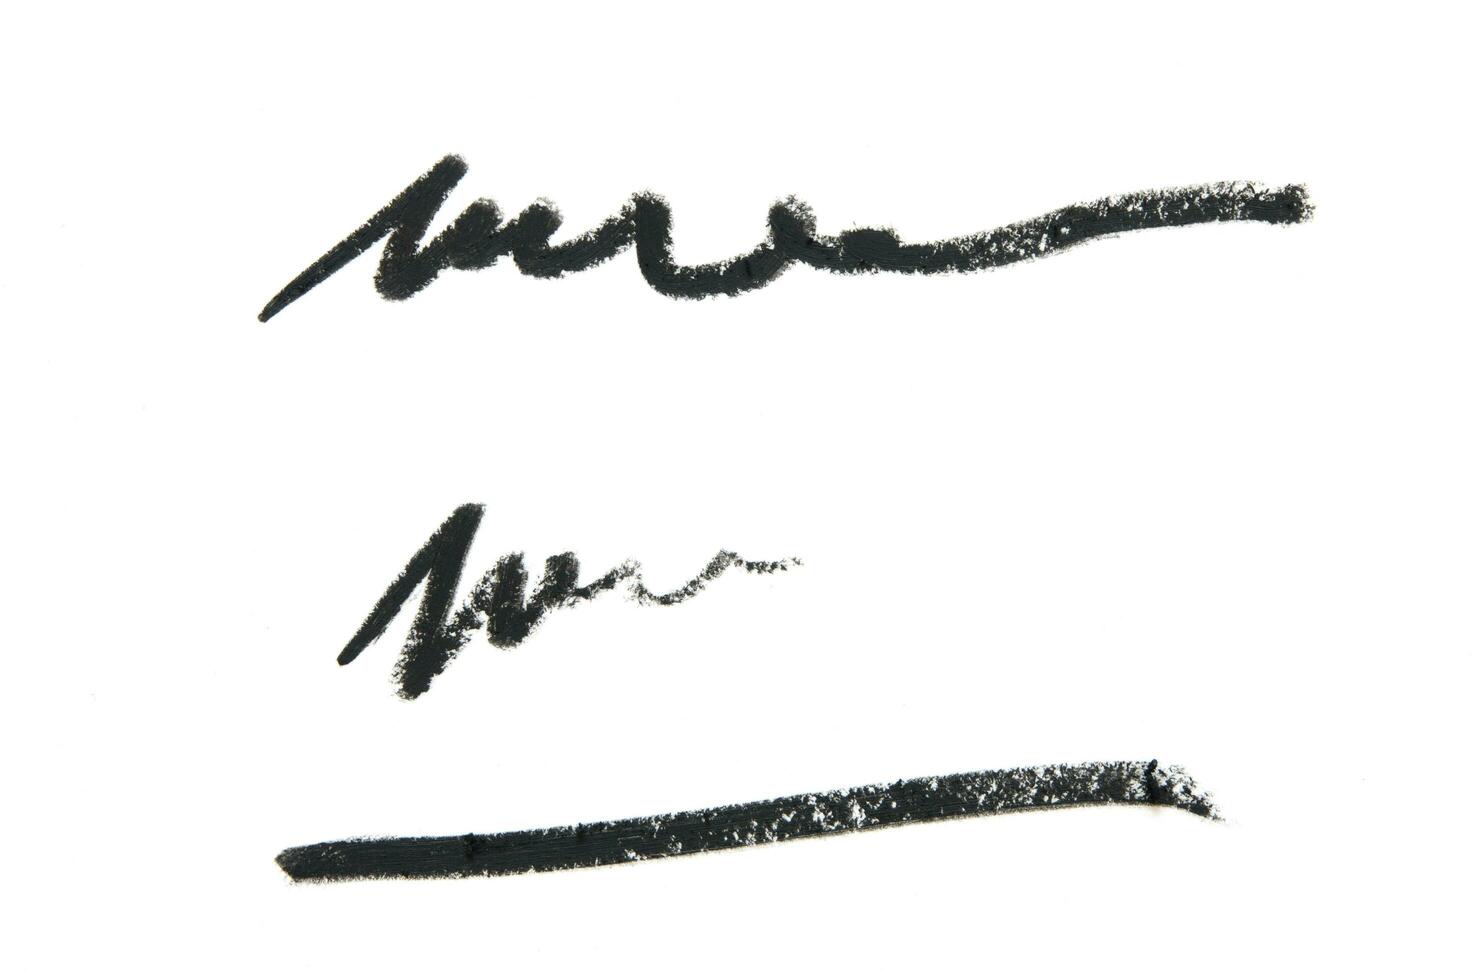 Black color Cosmetic pencil strokes on background. - Image photo